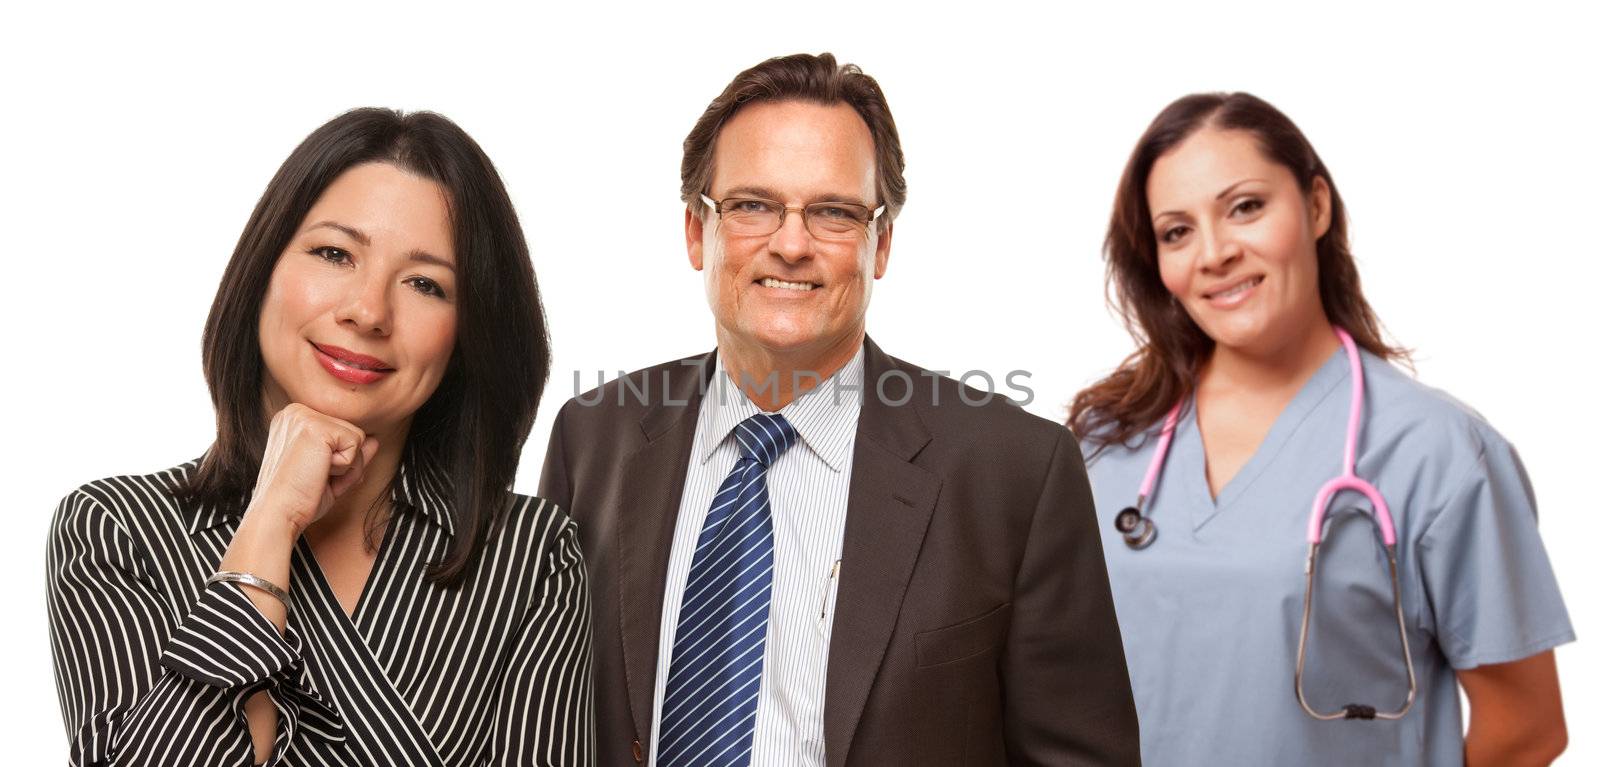 Hispanic Woman with Husband and Female Doctor or Nurse by Feverpitched